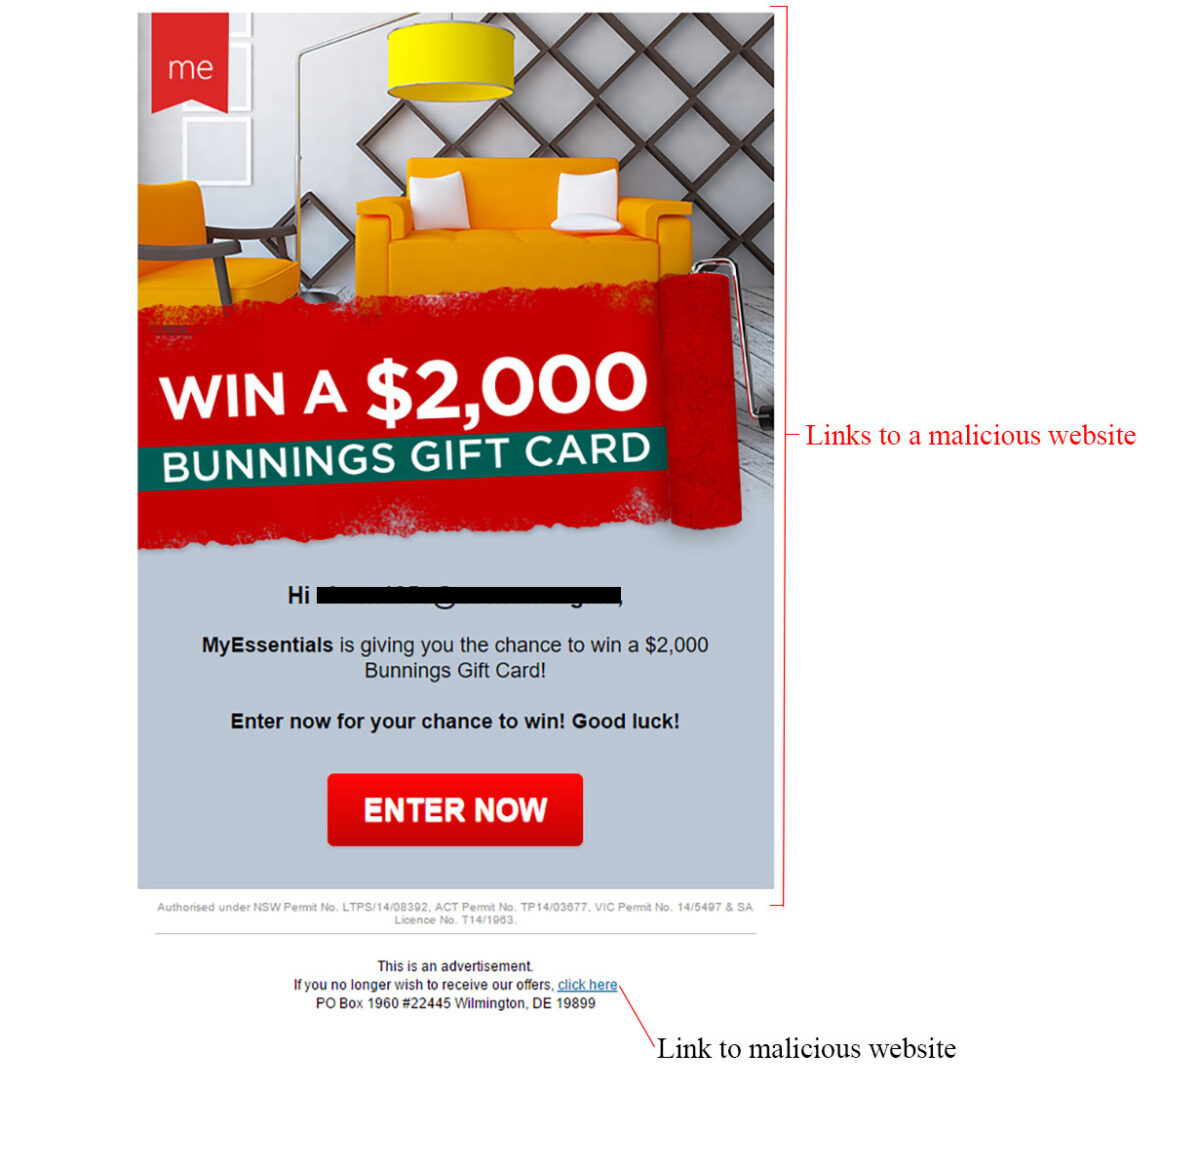 Win A Bunnings Gift Card Email Scam MailShark